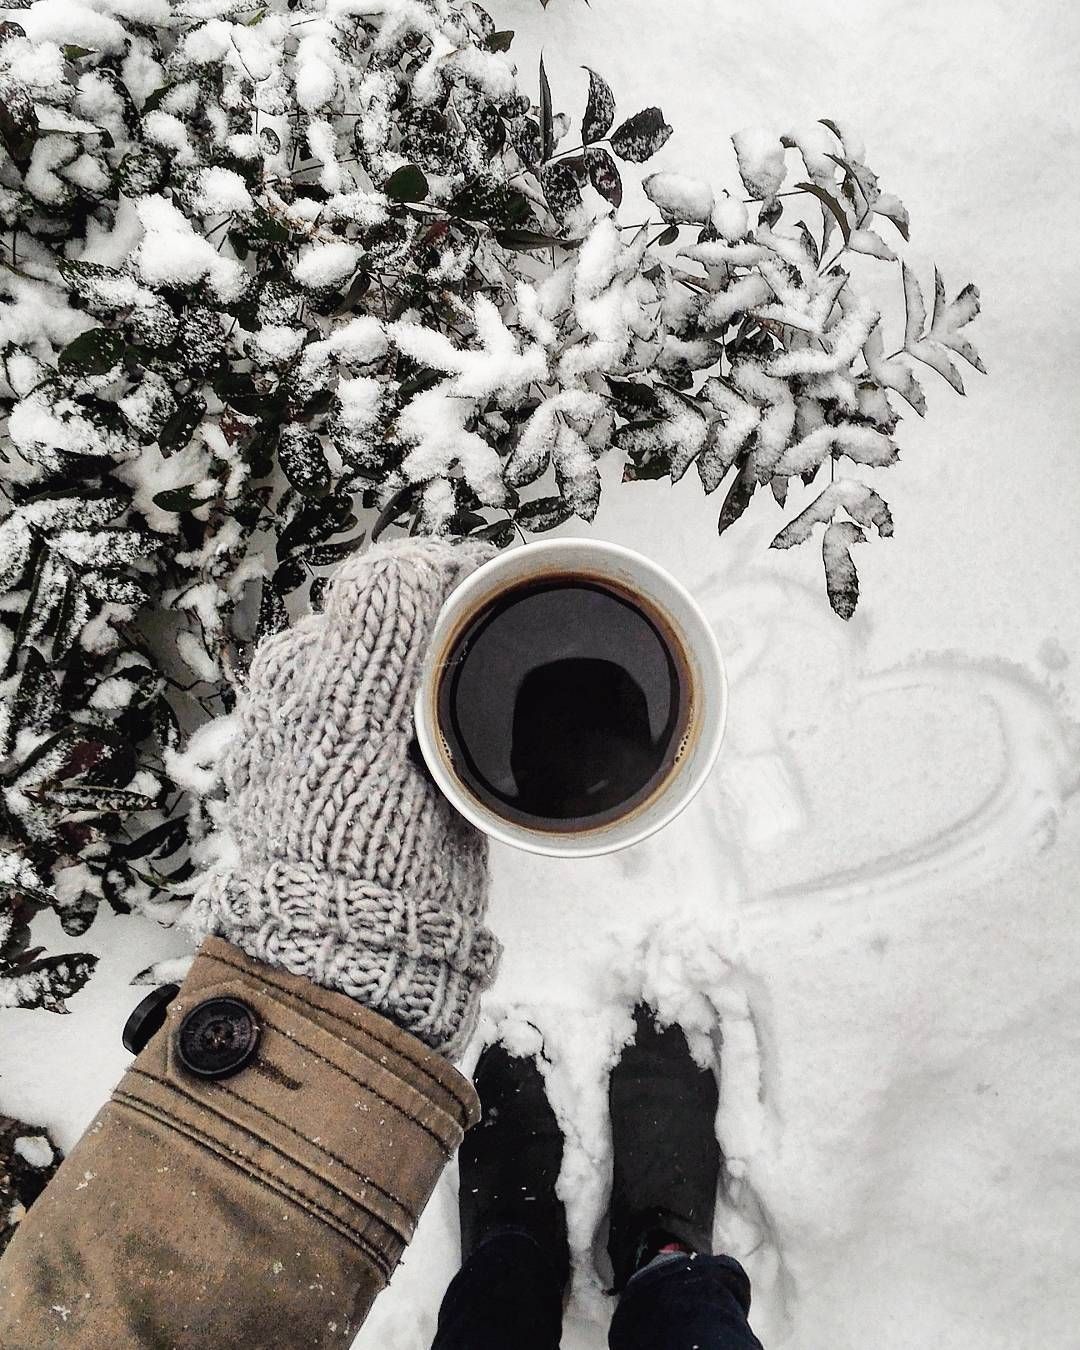 A person holding up their coffee cup in the snow - Coffee